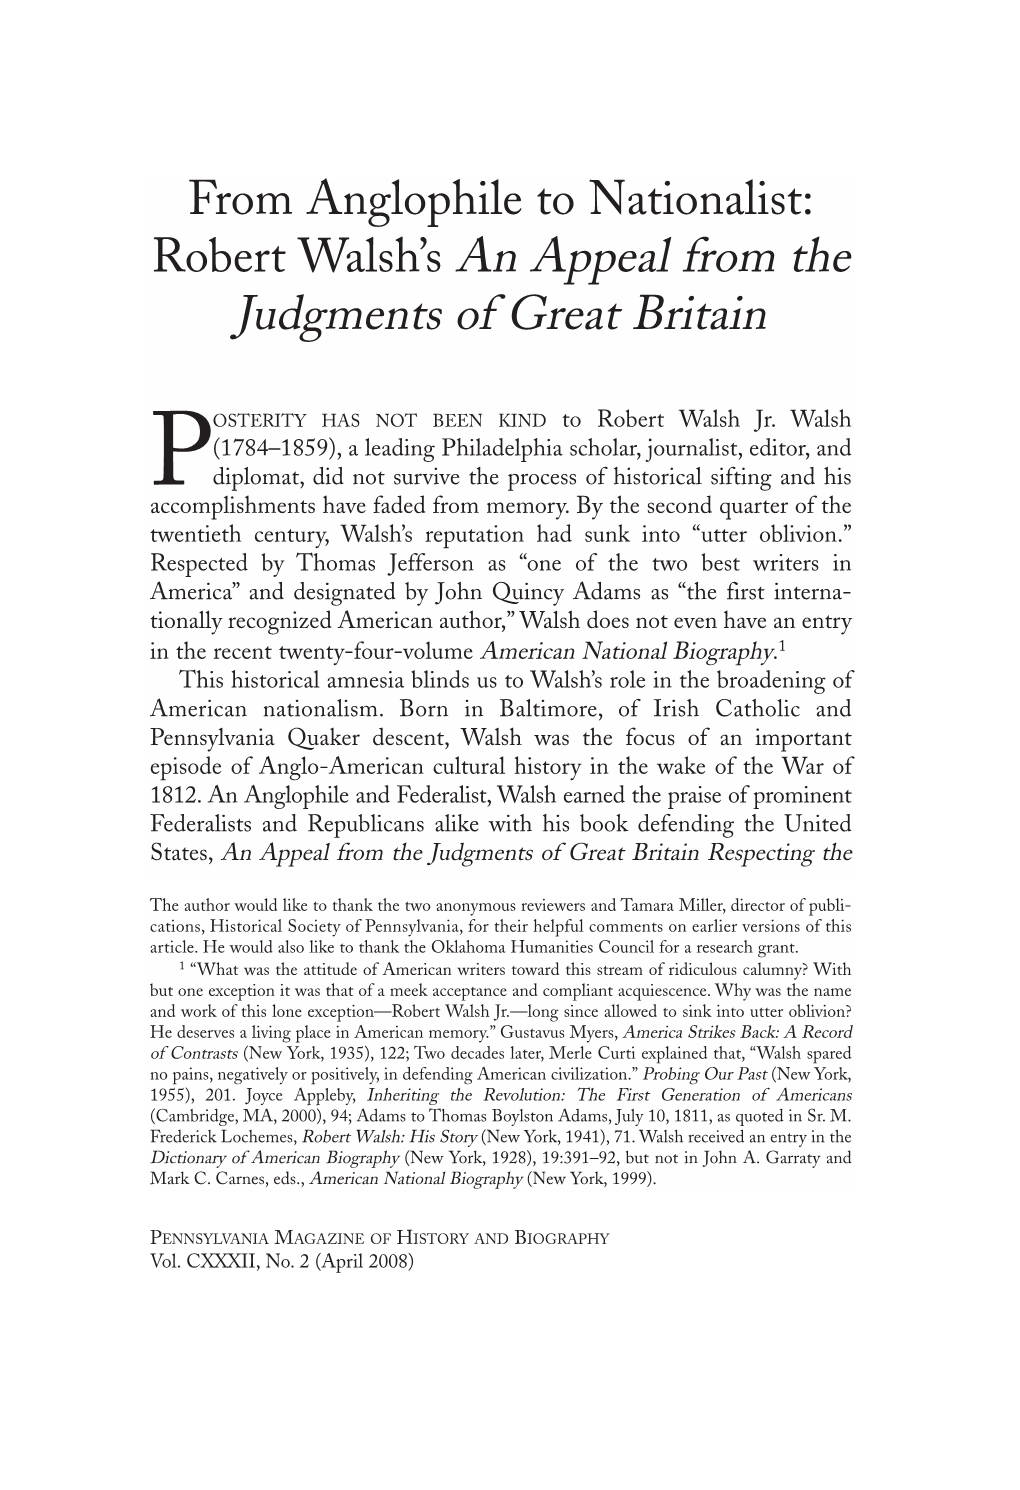 Robert Walsh's an Appeal from the Judgments of Great Britain